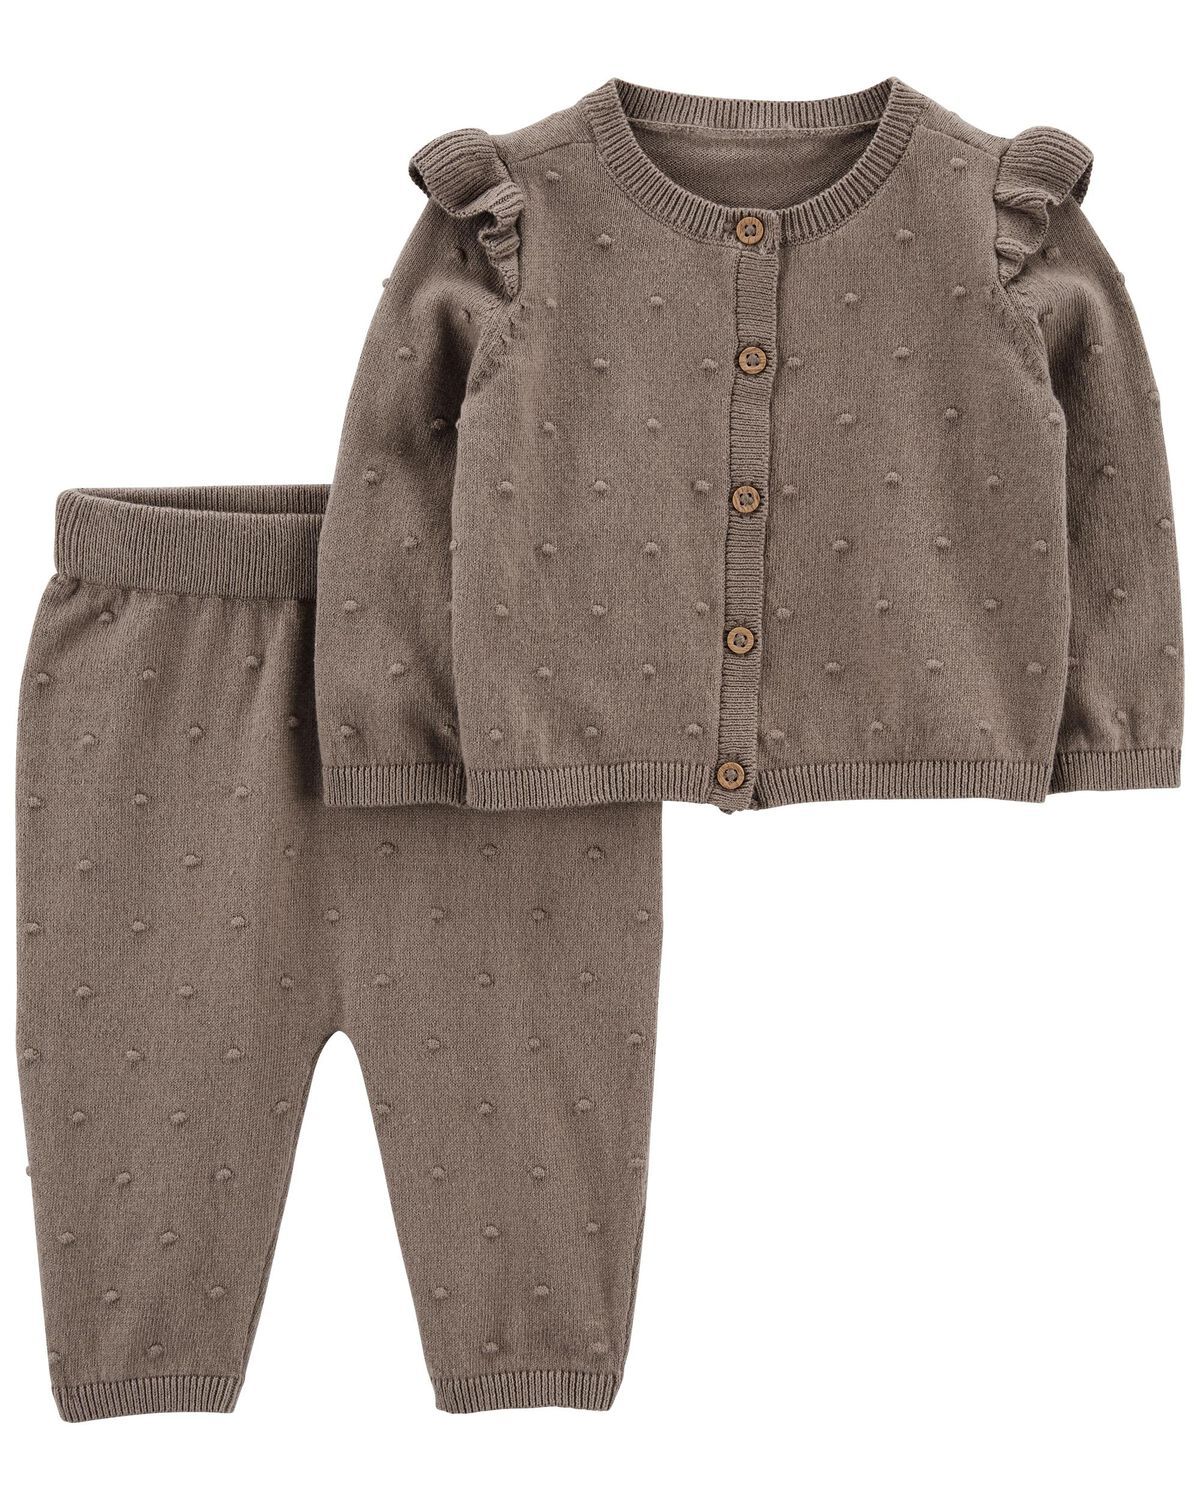 Brown Baby 2-Piece Button-Front Sweater Set | carters.com | Carter's